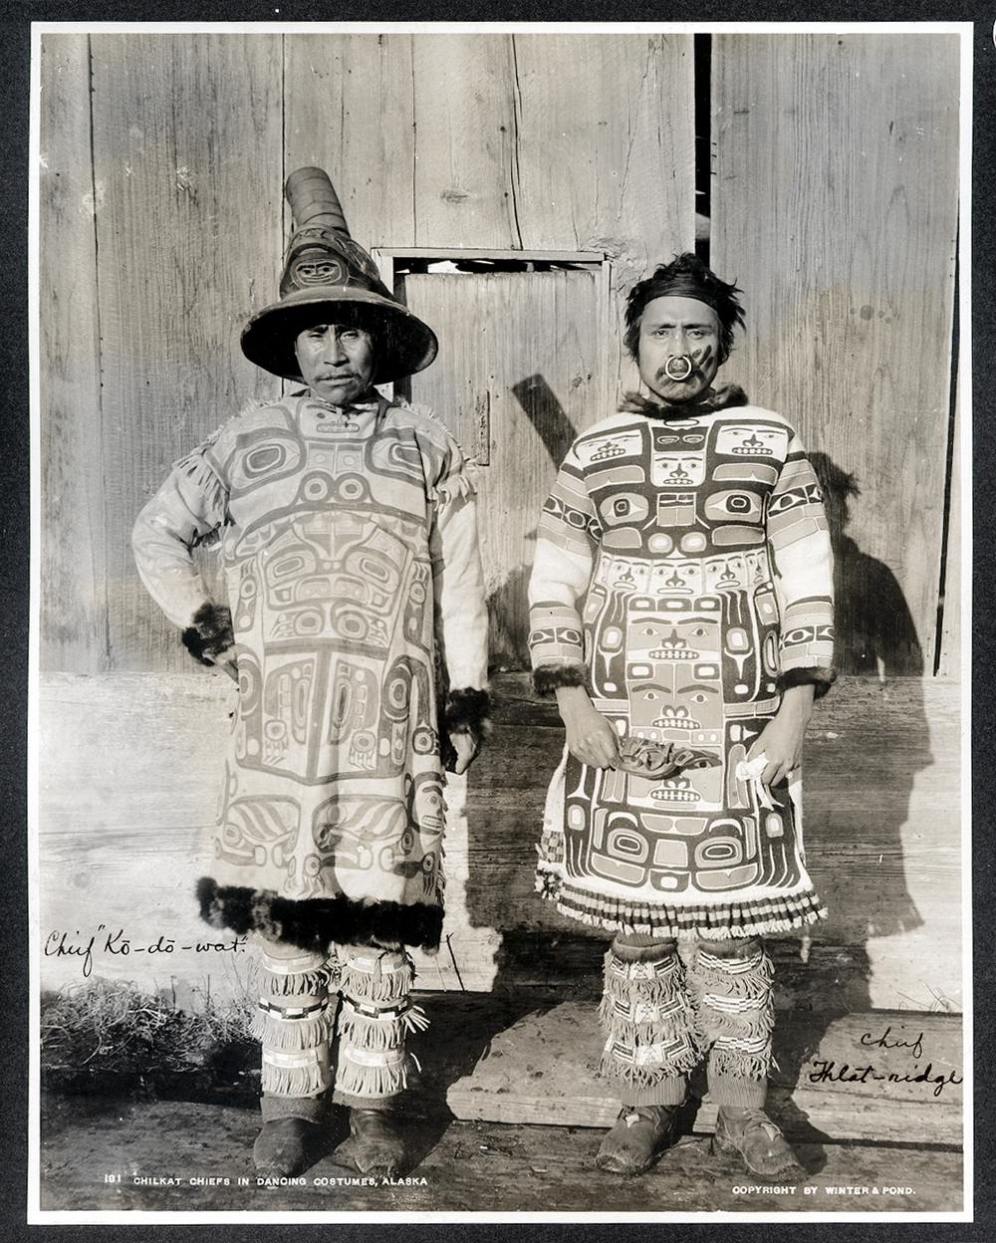 Chilkat (Tlingit) Chiefs in Dancing Costumes, Southeast Alaska. - Coudahwot and Yehlh-gouhu, chiefs of the Con-nuh-ta-di at Klukwan, wearing totemic design dance shirts and beaded leggings. Photographer: Winter & Pond, ca. 1895.: